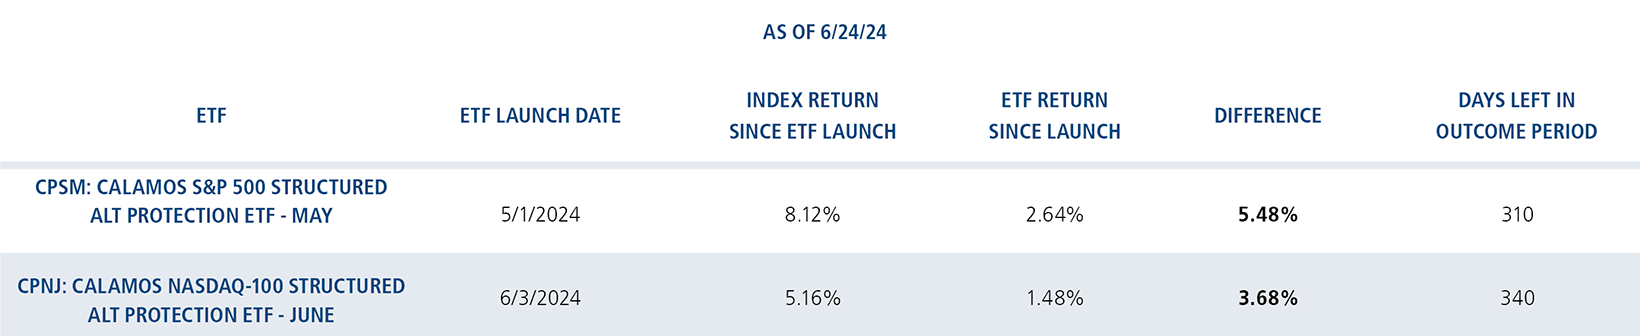 CPSM and CPNJ return since launch and index return since launch